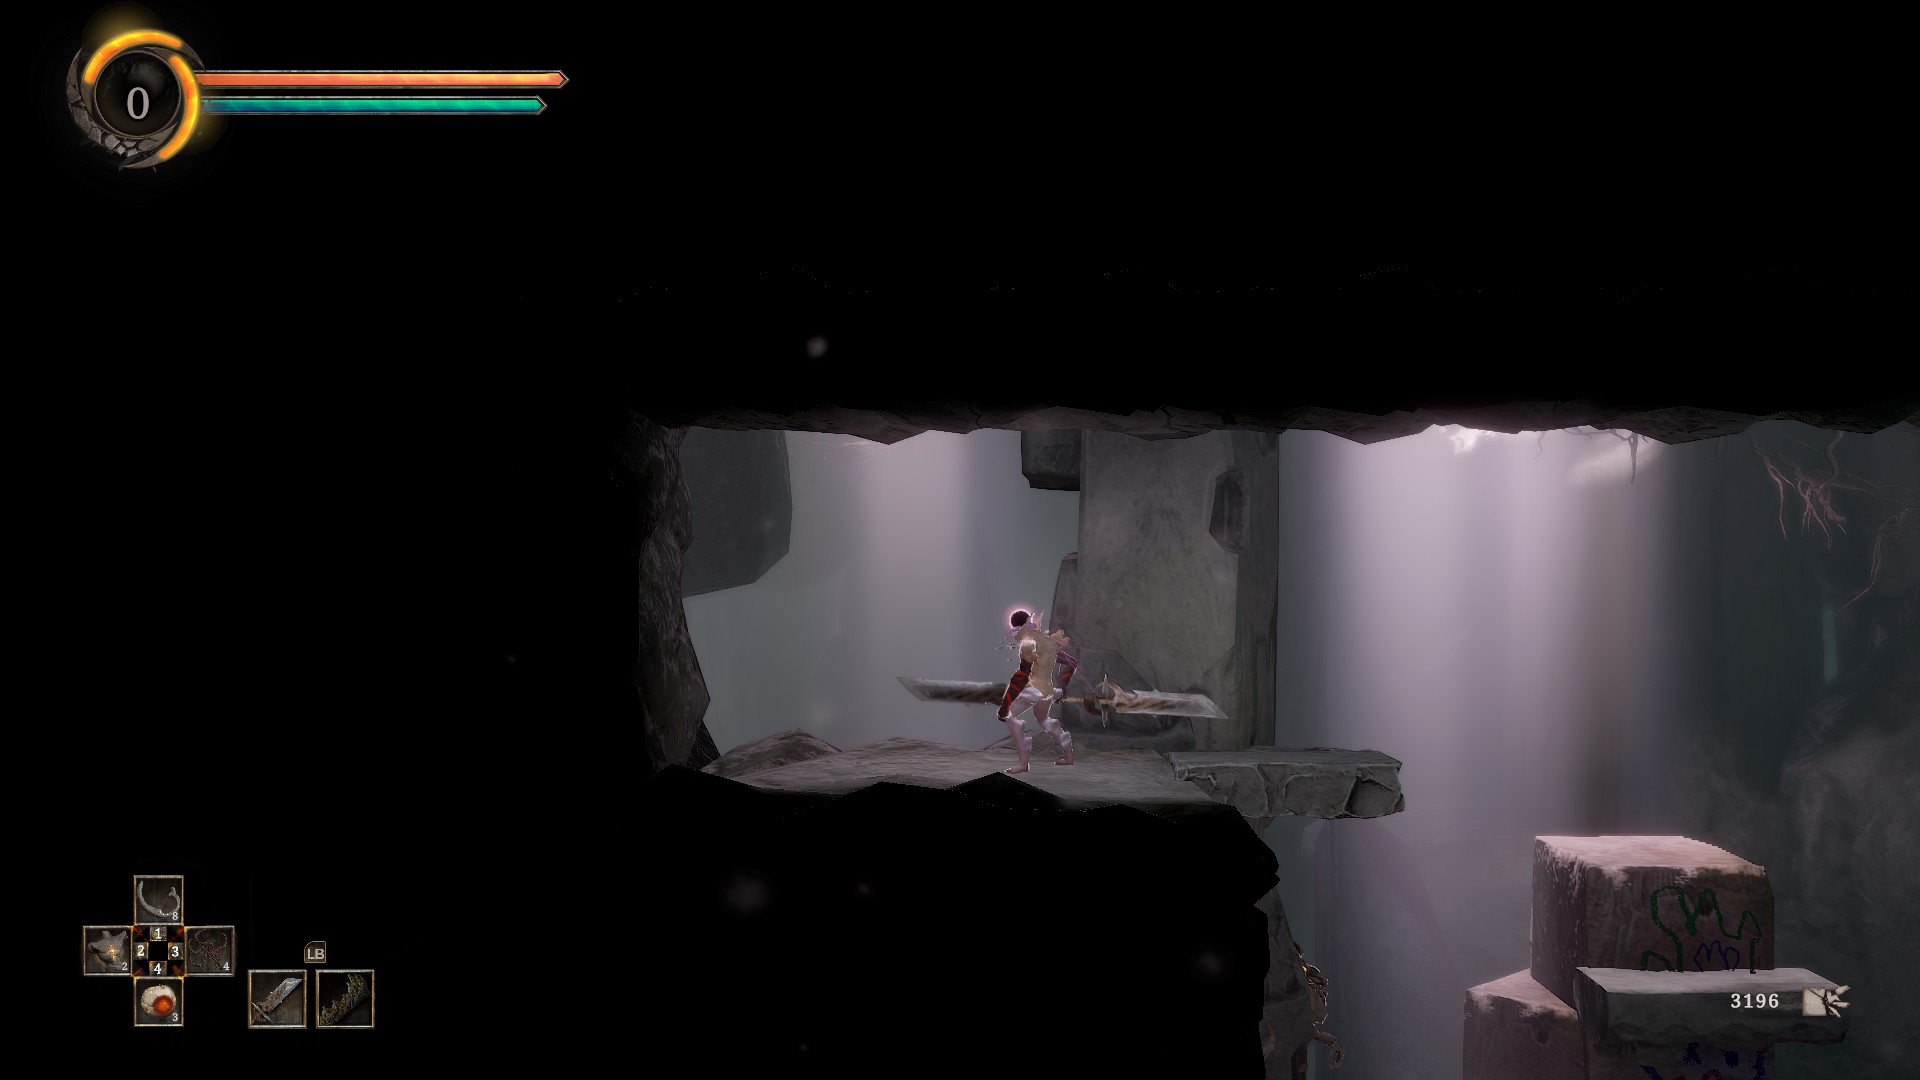 Character with red arms holding a blade in a dimly lit cave.